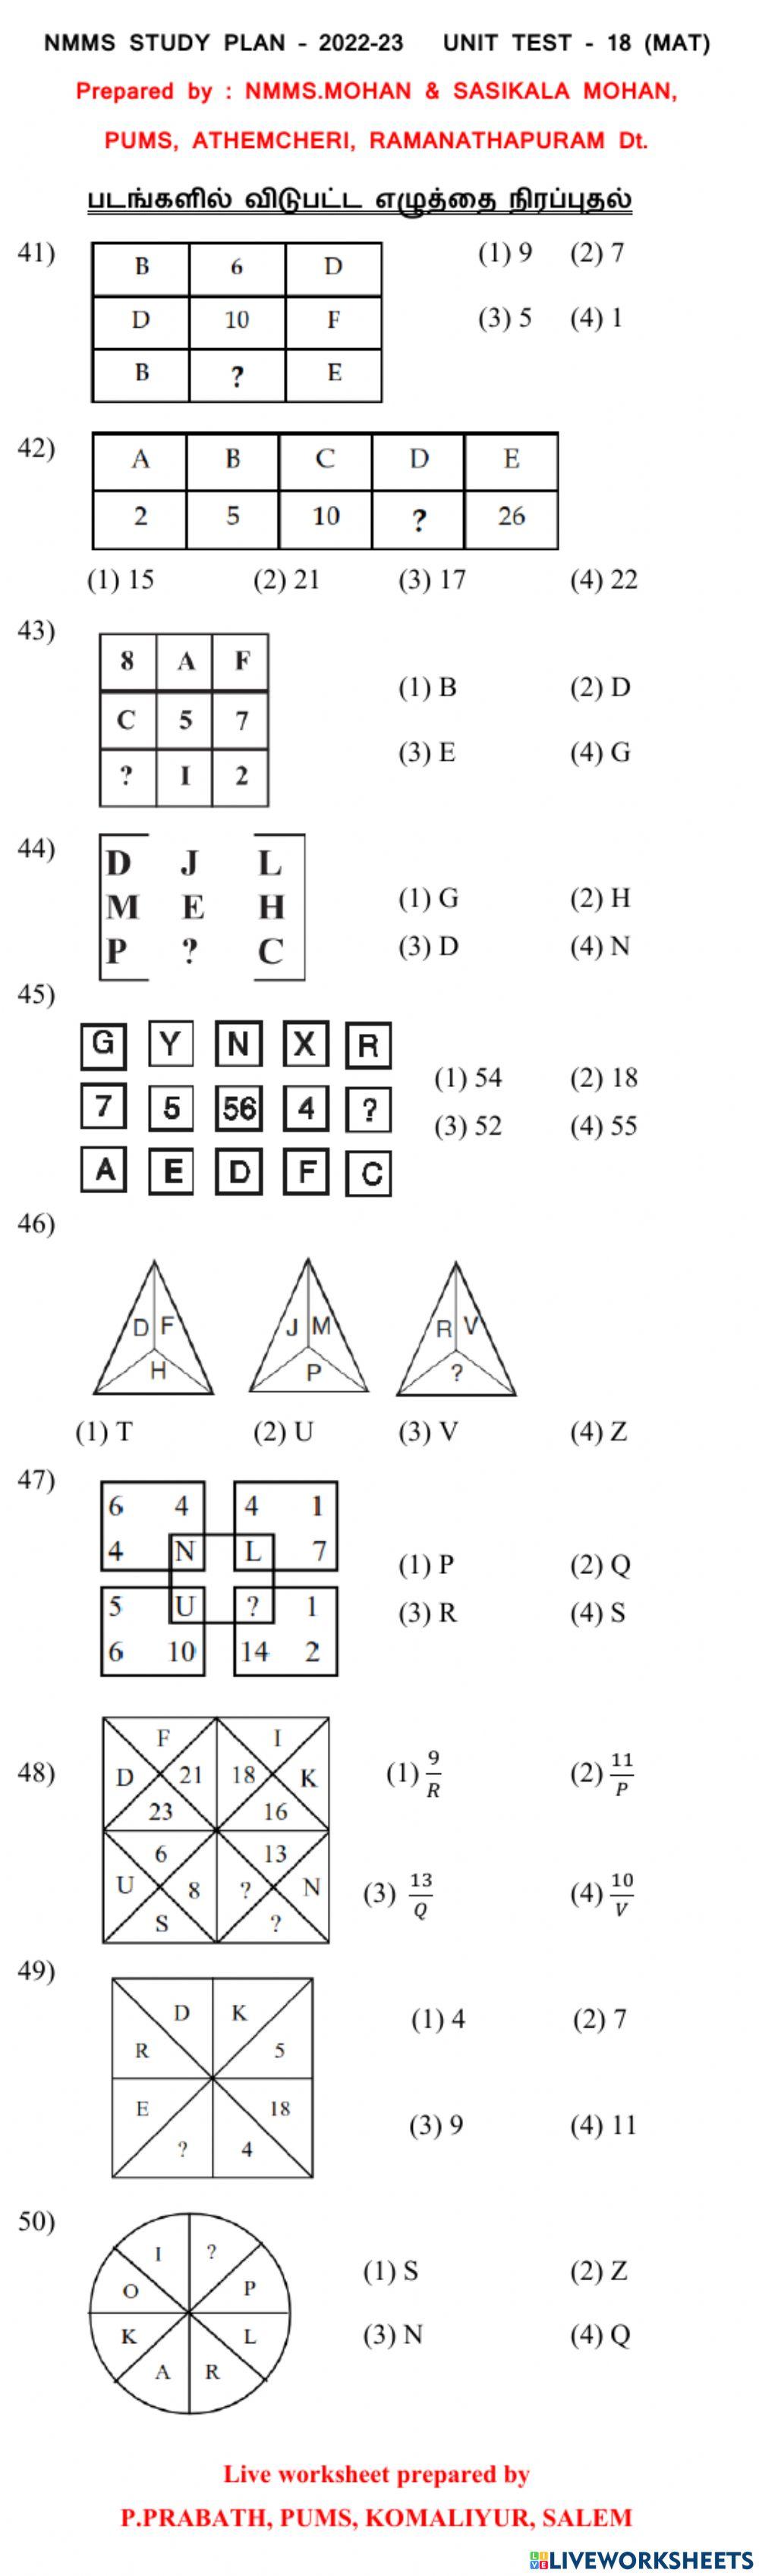 Missing letters in the figure